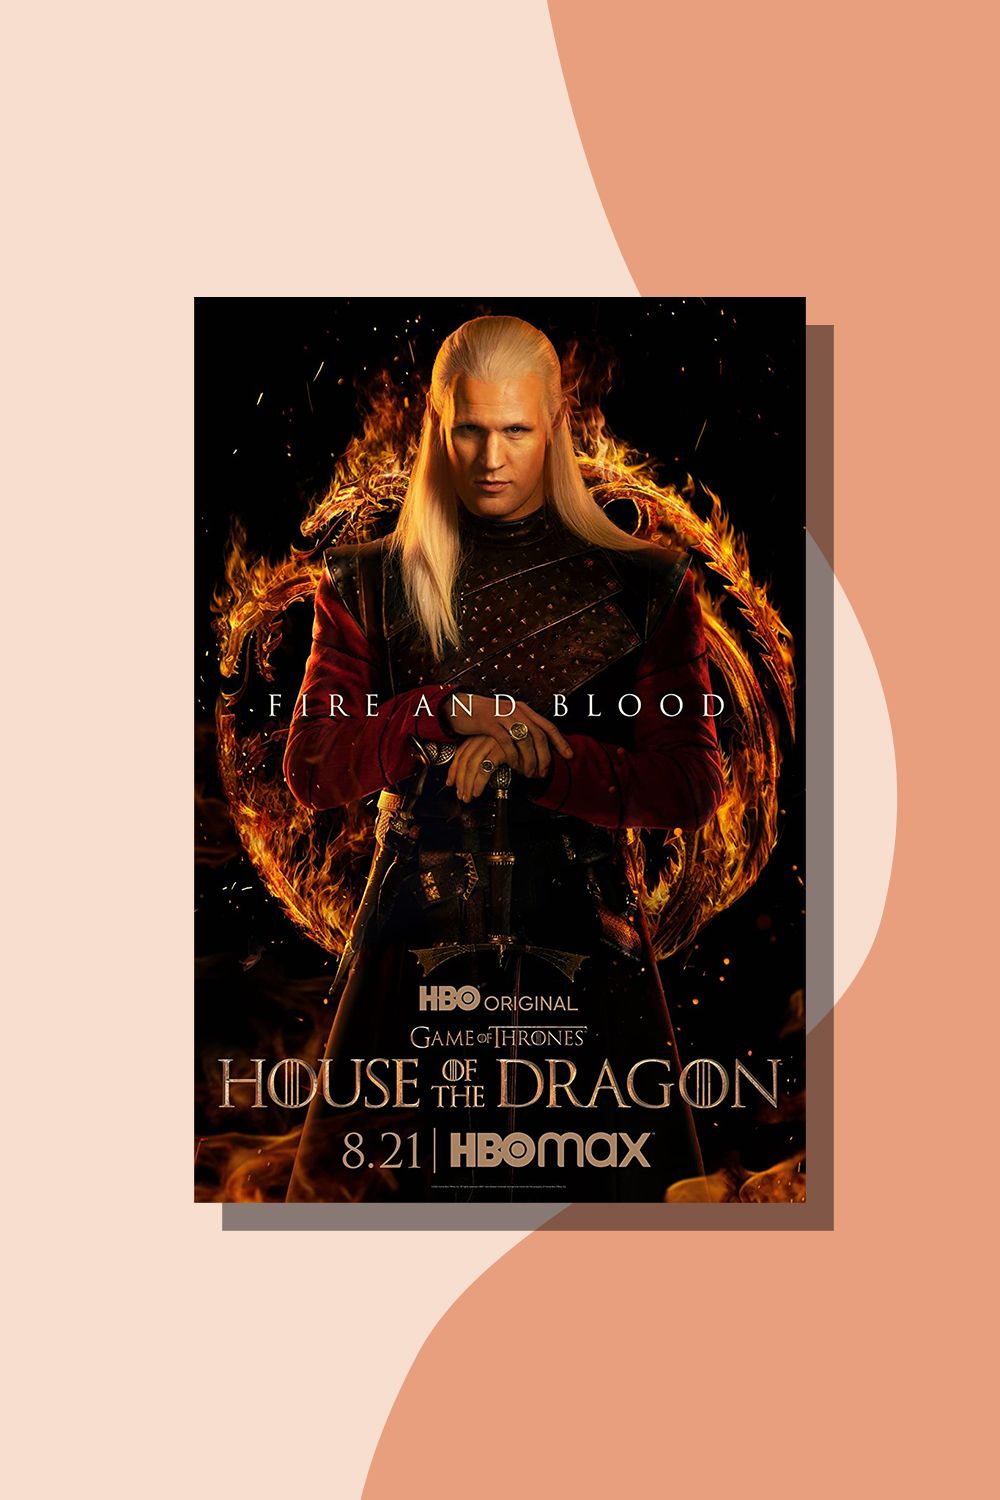 House of the Dragon: HBO's Game of Thrones spinoff has come into its own.